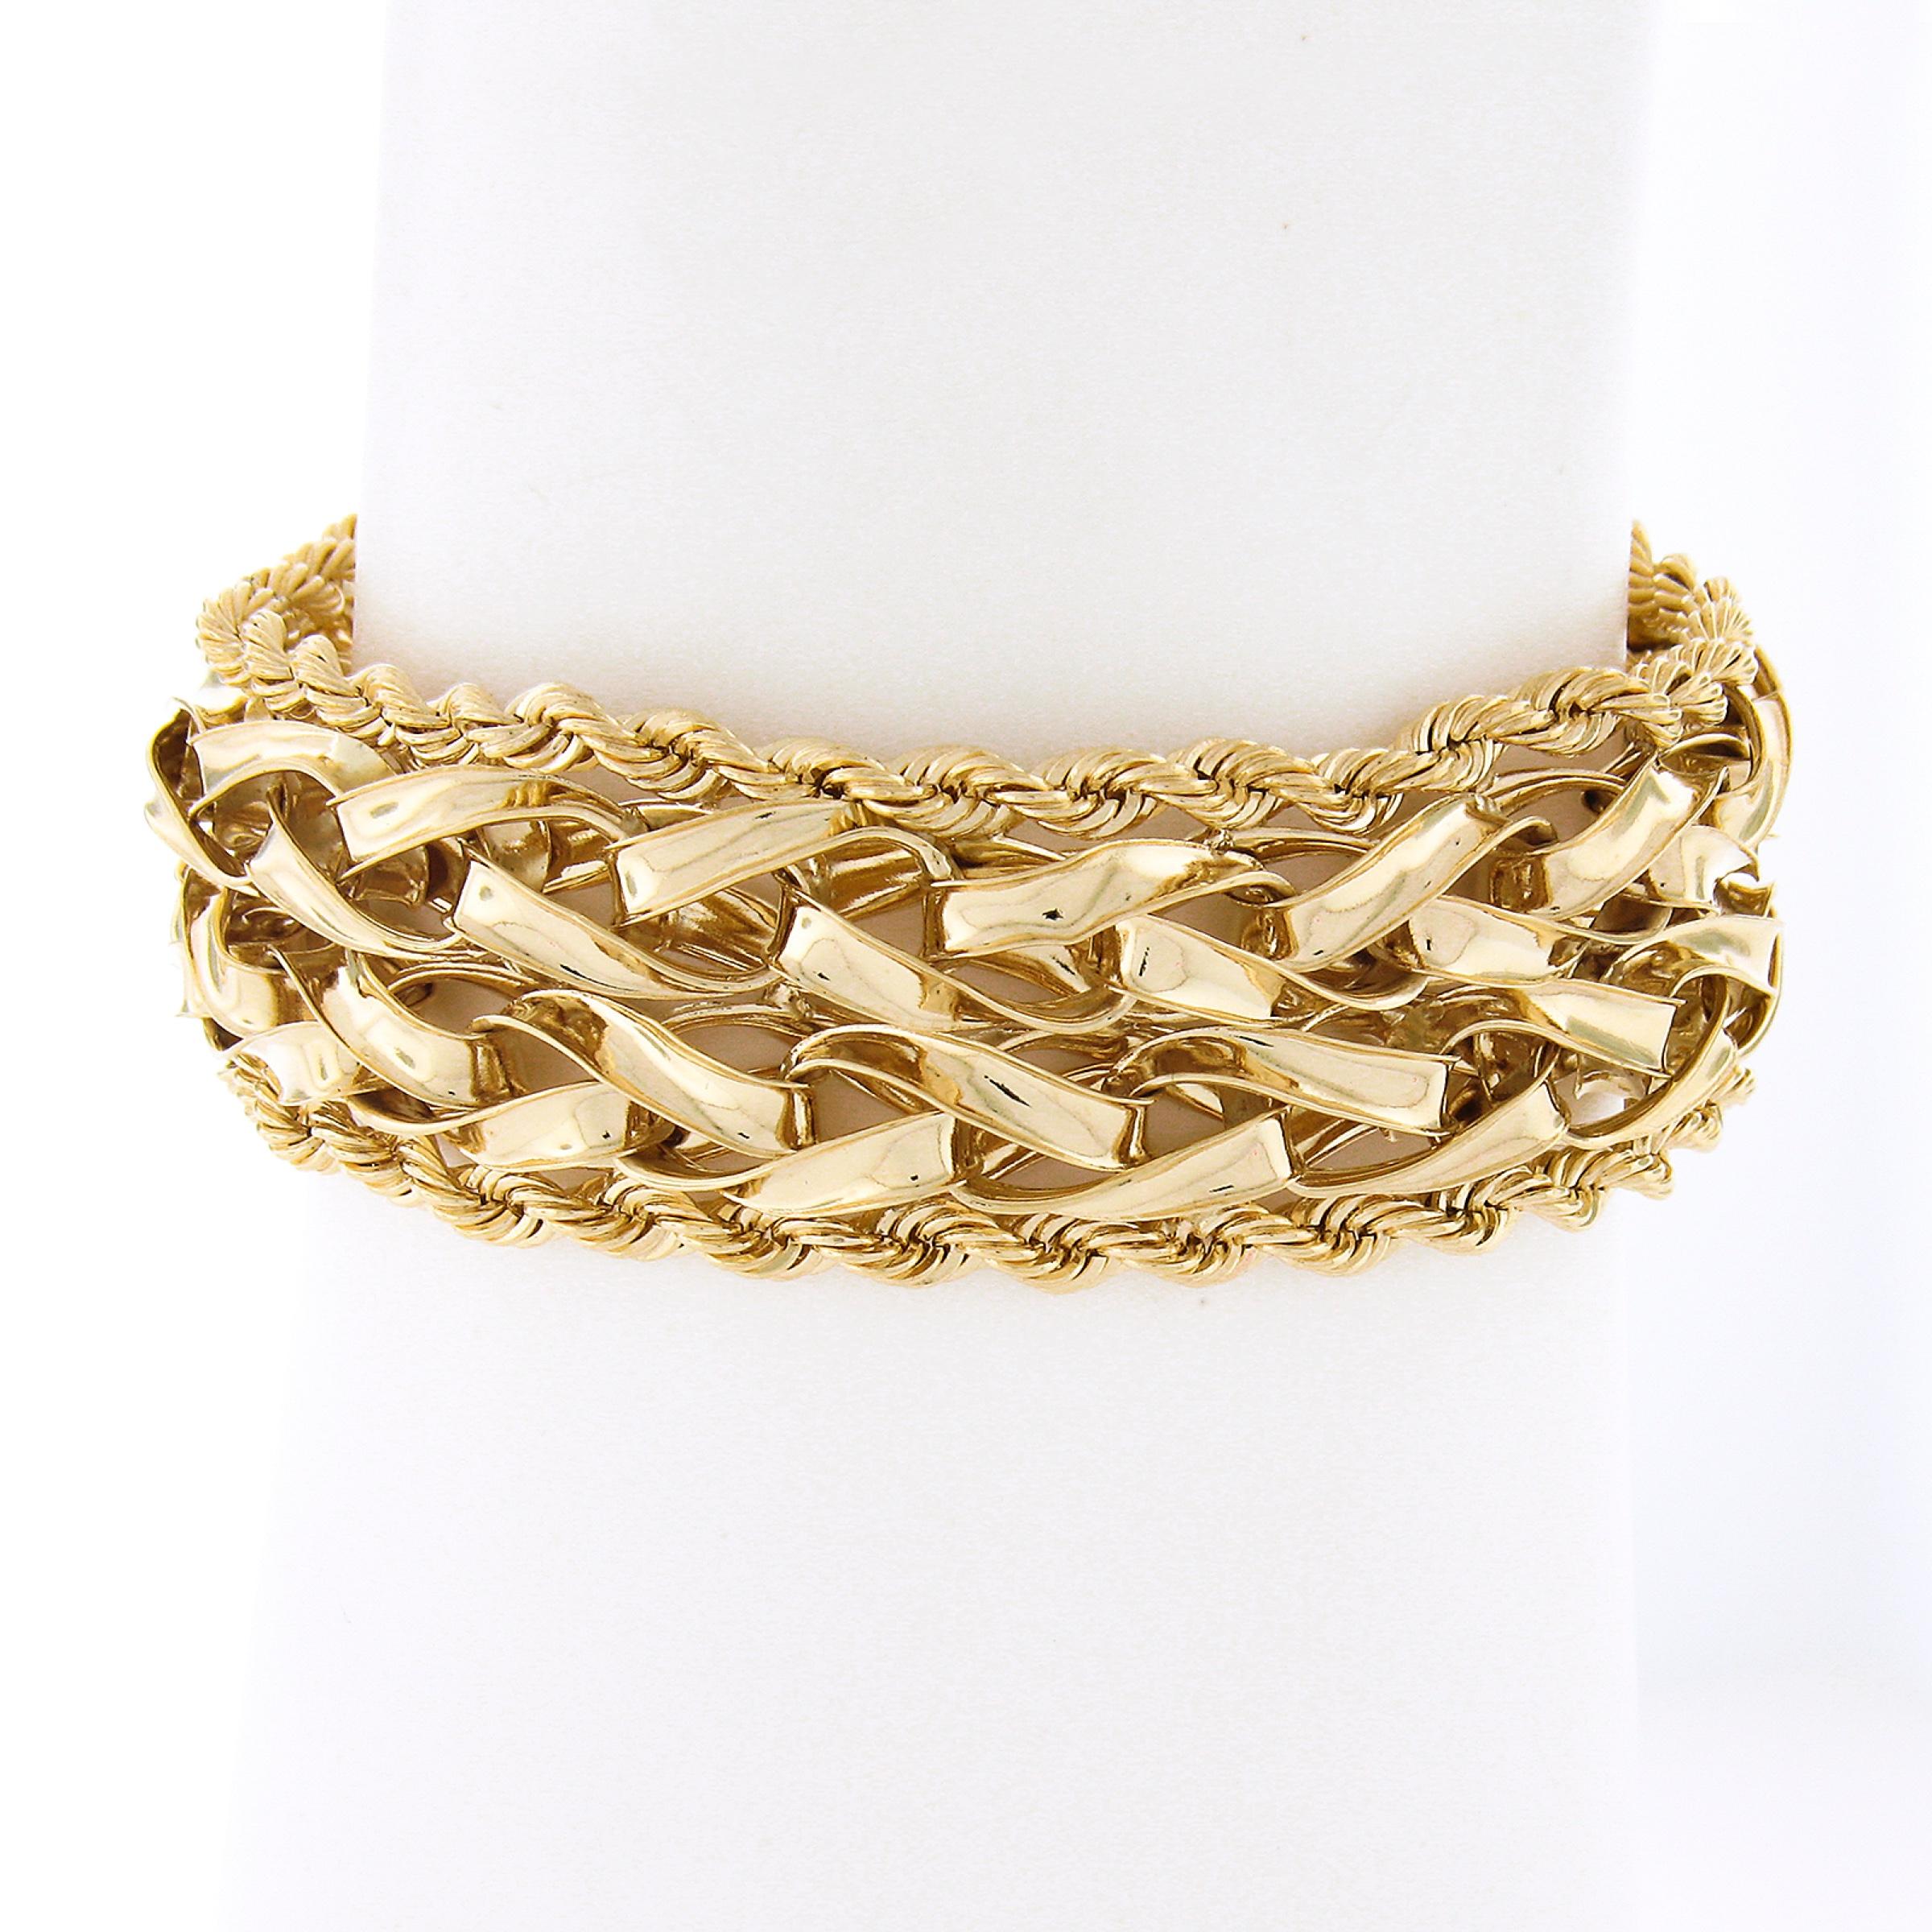 You are looking at a gorgeous and well made vintage bracelet that's crafted in solid 14k yellow gold. This unique wide bracelet is constructed from a uniquely braided link center with high polished finish and further two rope link chains on both